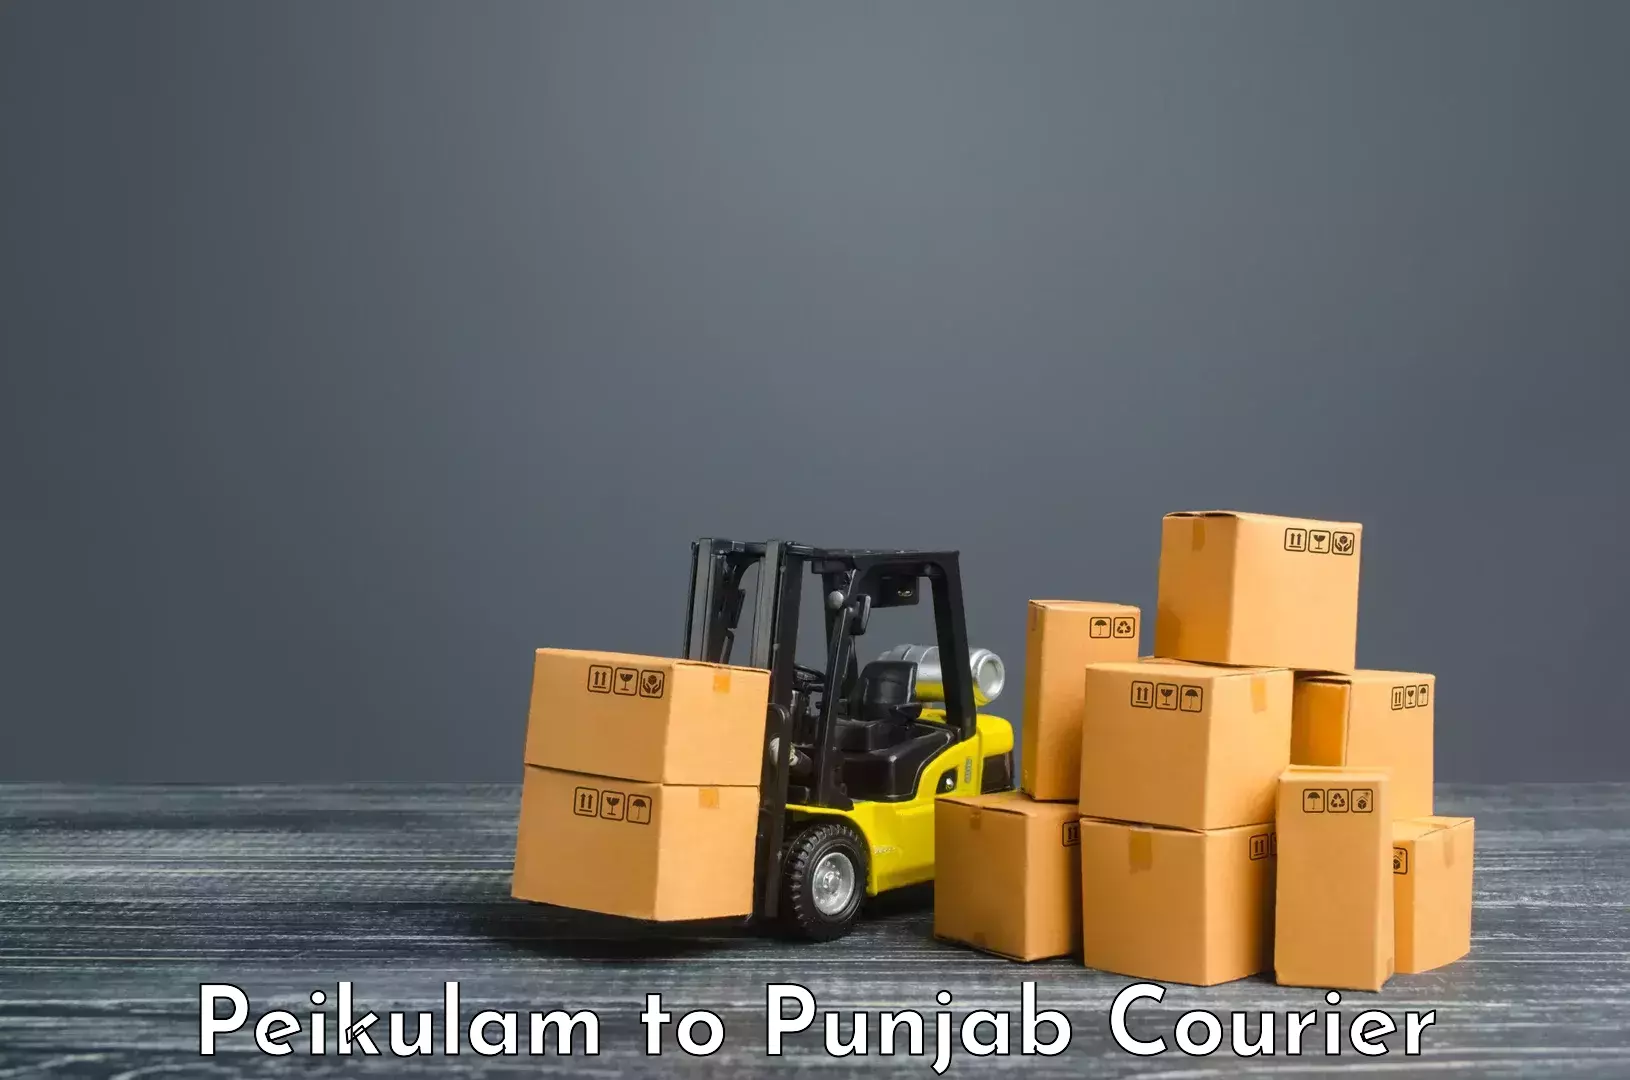 Overnight delivery in Peikulam to IIT Ropar